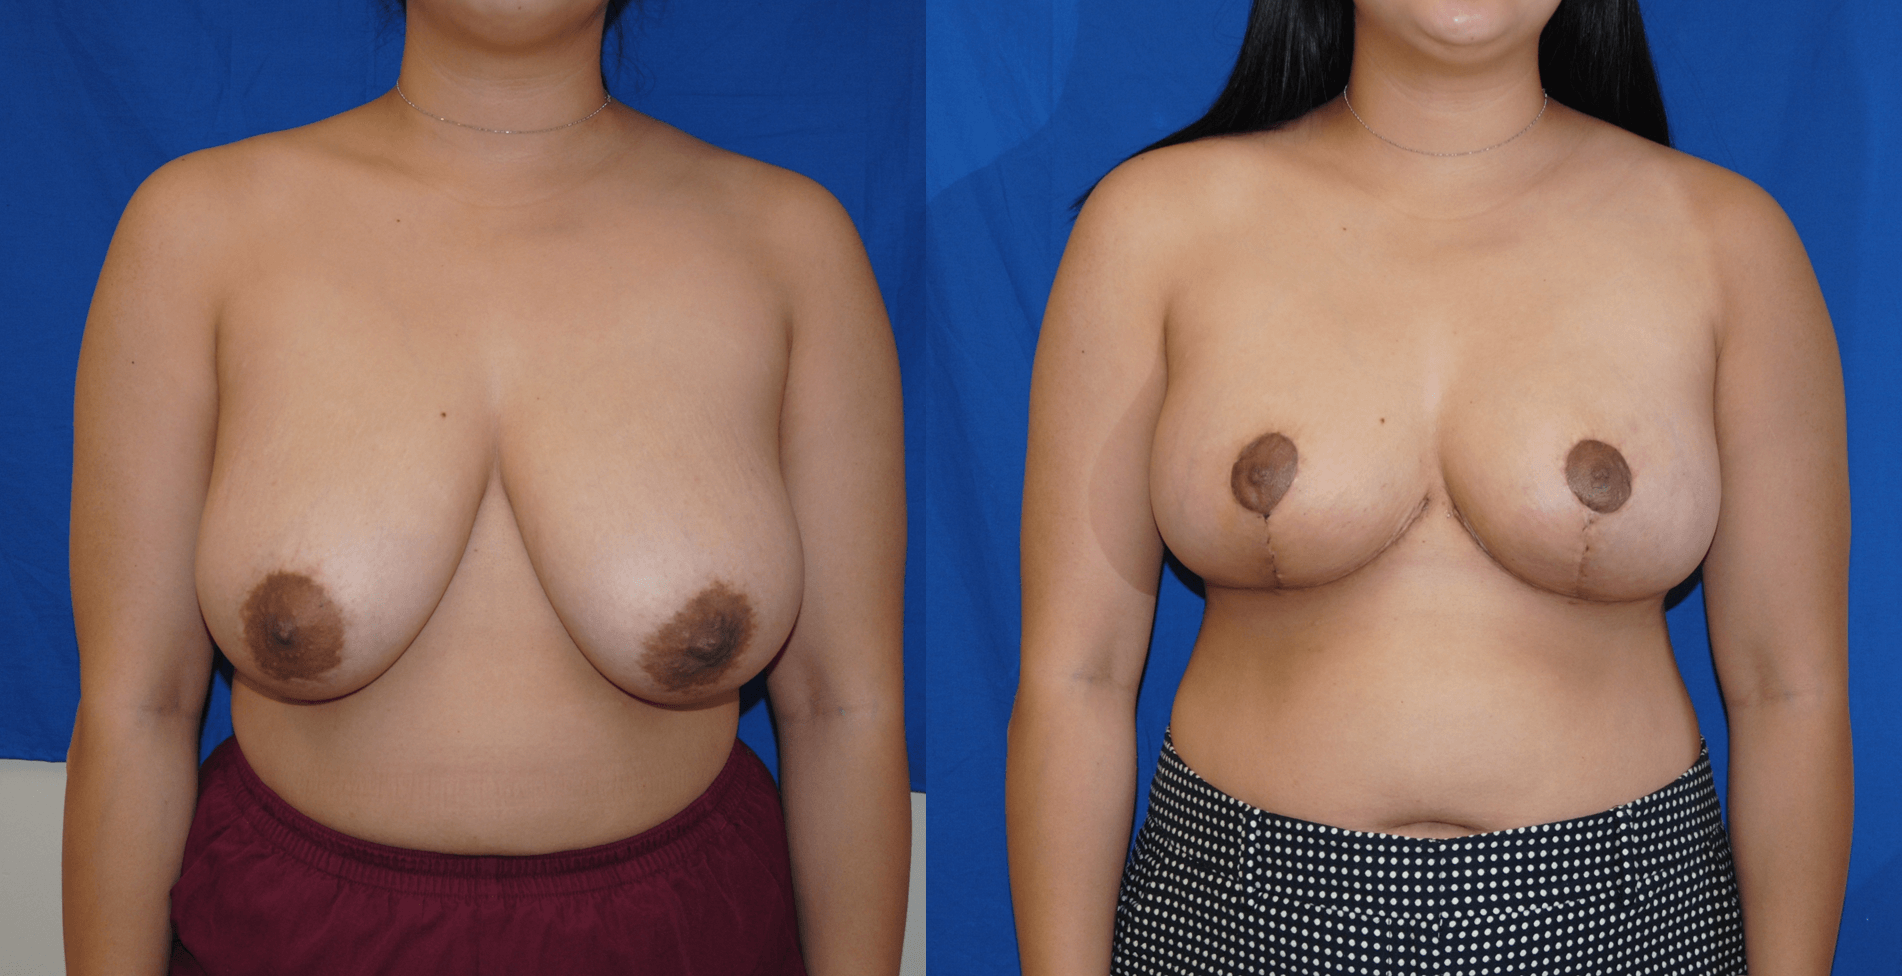 Are You a Breast Reduction Candidate?